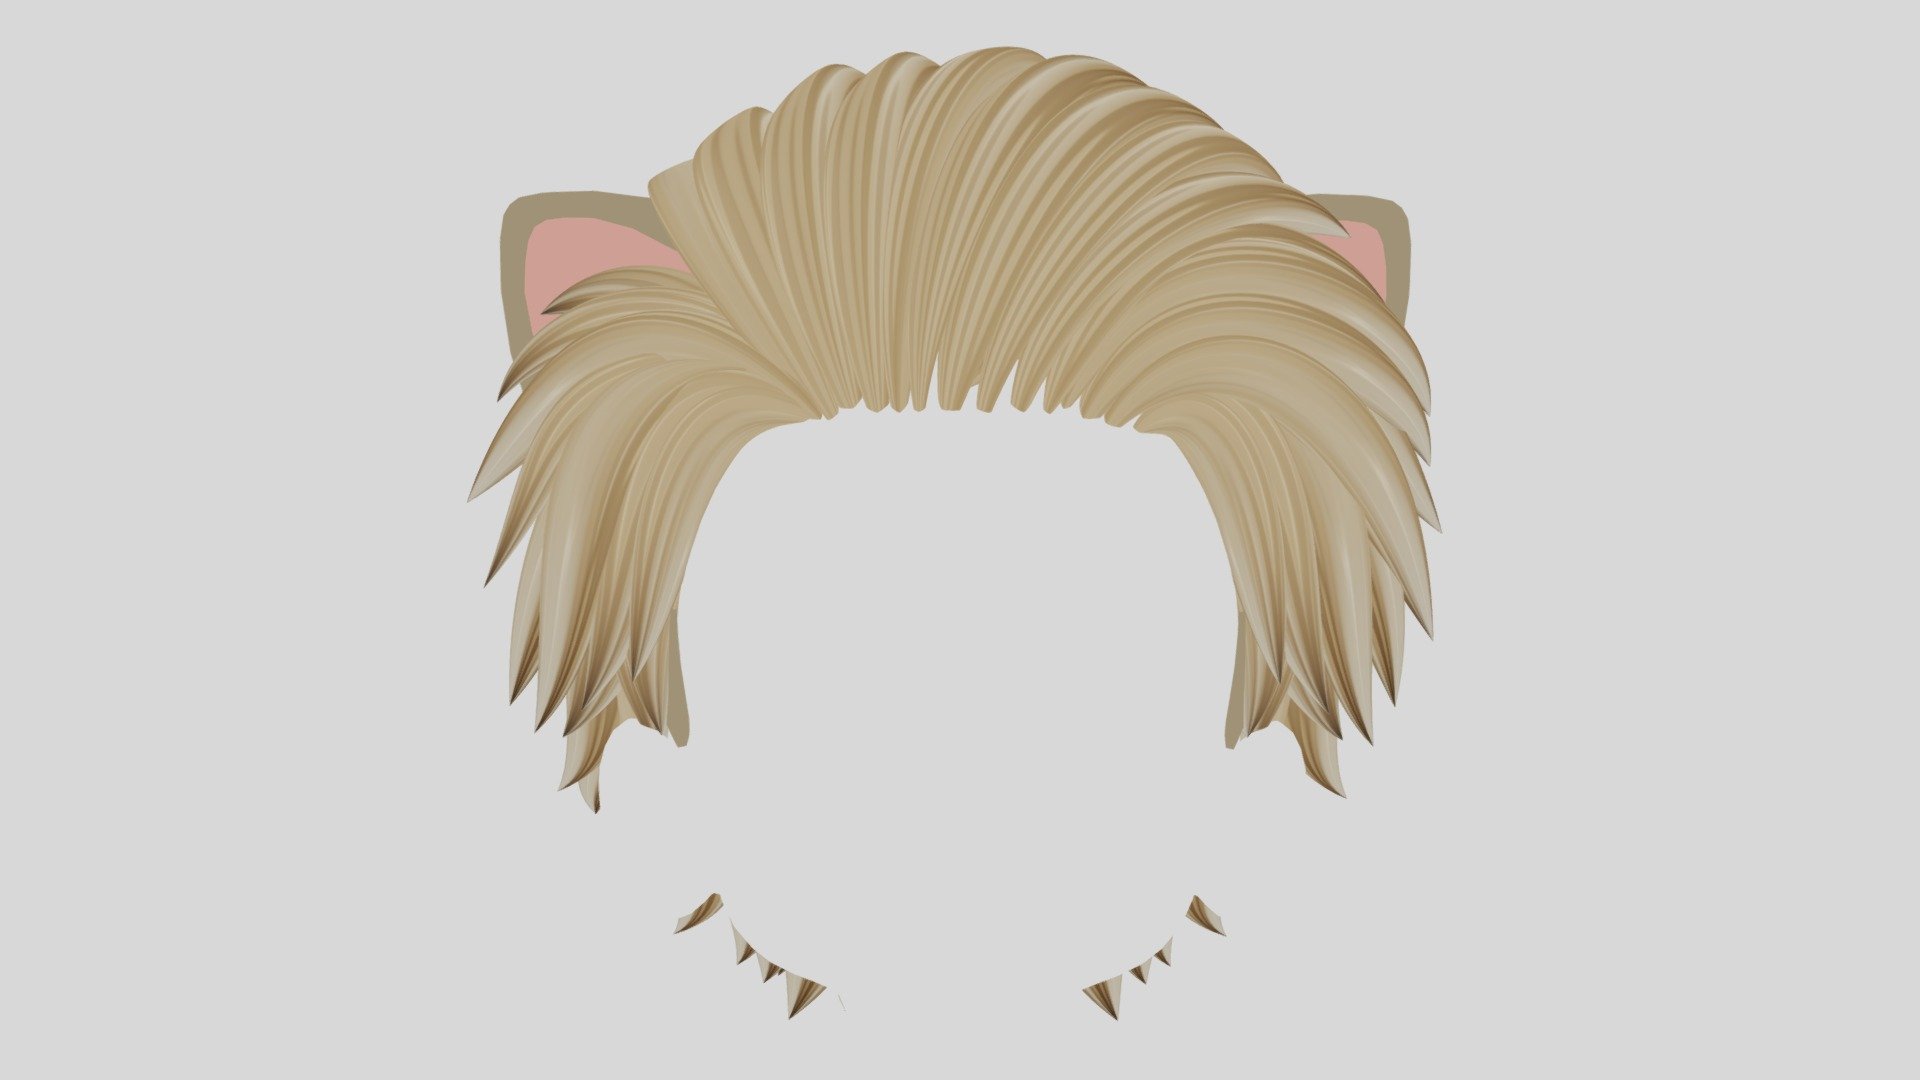 Cute cat ears &amp; editable bezier curves based hair ready to be converted into mesh. Includes the bevel object to modelate the bevel hair shape and thickness of the hair if required. Material features five different color textures (Blonde, Black, Brown, Pink and Red Hair) or you can remove the texture to easily cutomize it to any color.

The Hairbase included is ready to match with the Anime Character Basemesh (skfb.ly/oqsxJ), but the hair assets are easily adaptable to any head shape!.

💮 If you liked my work remember to Follow me and Share! 🧸 💬 Commissions Open: ko-fi.com/Tsubasa_Art ☕🌸 !! - Anime Hair (Swept-back Style) & Cat Ears - Buy Royalty Free 3D model by Tsubasa ツバサ (@Tsubasa_Art) 3d model